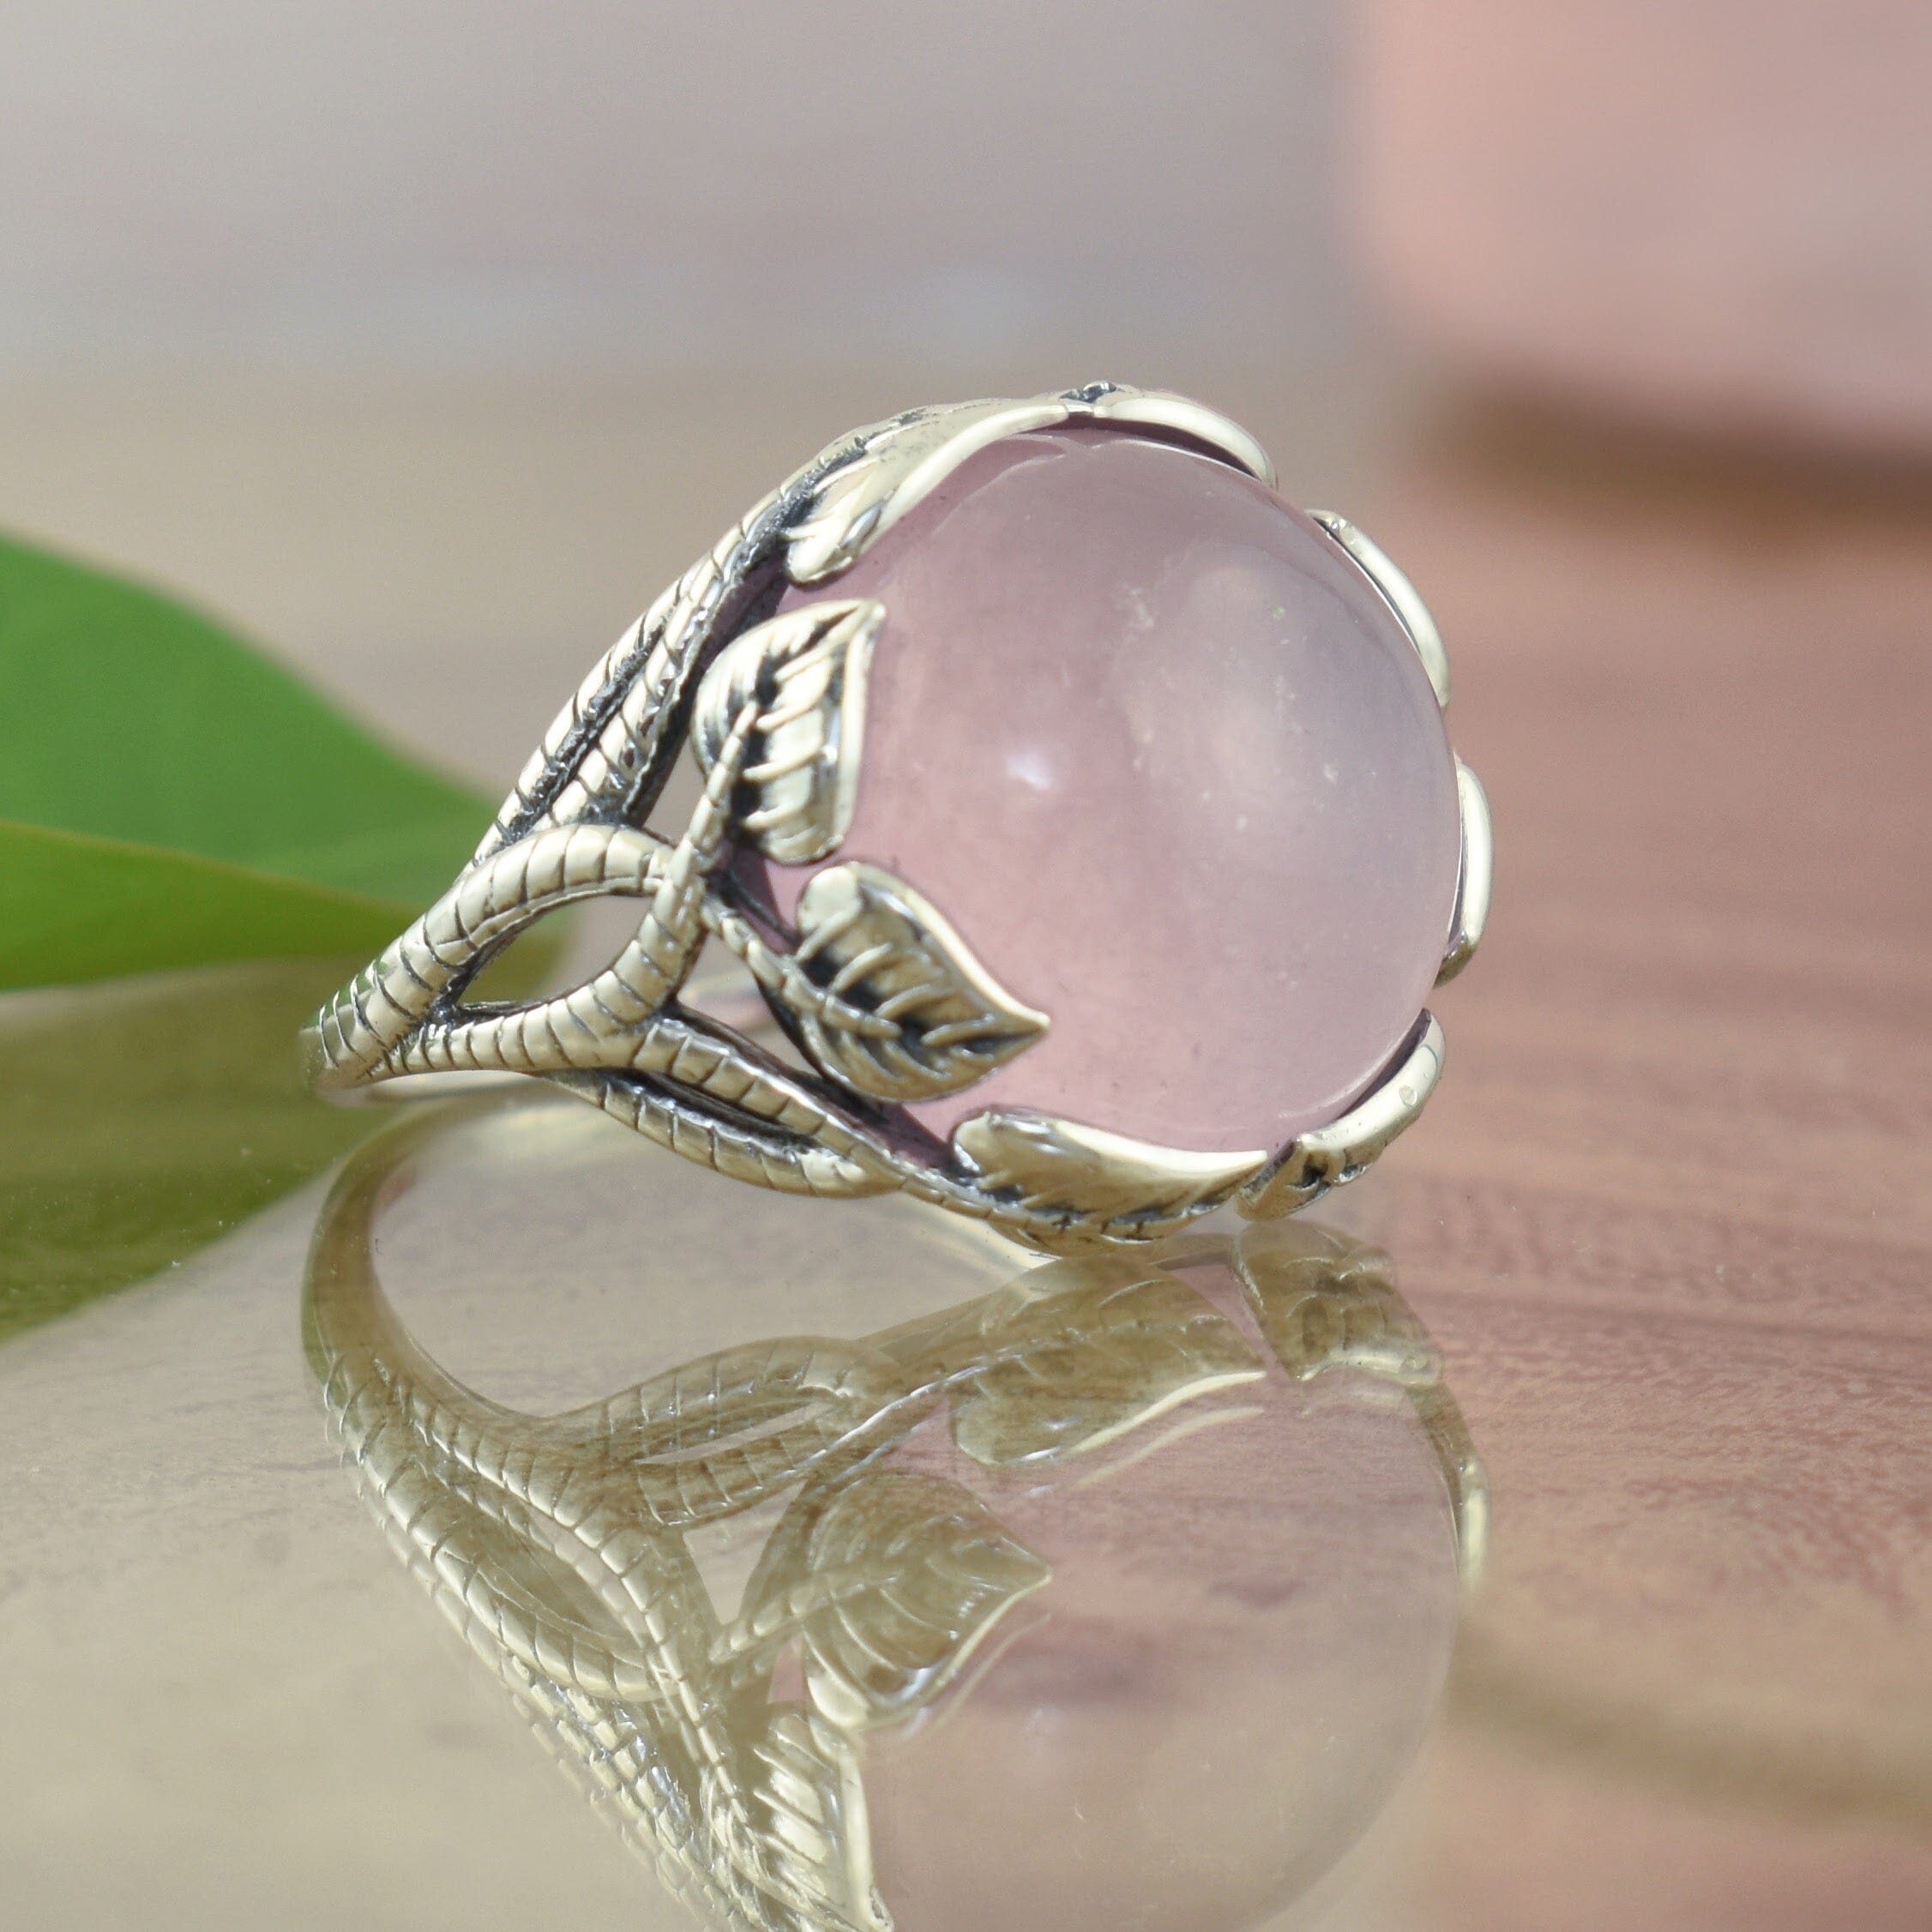 .925 sterling silver ring with leaf detail featuring a large round pink stone